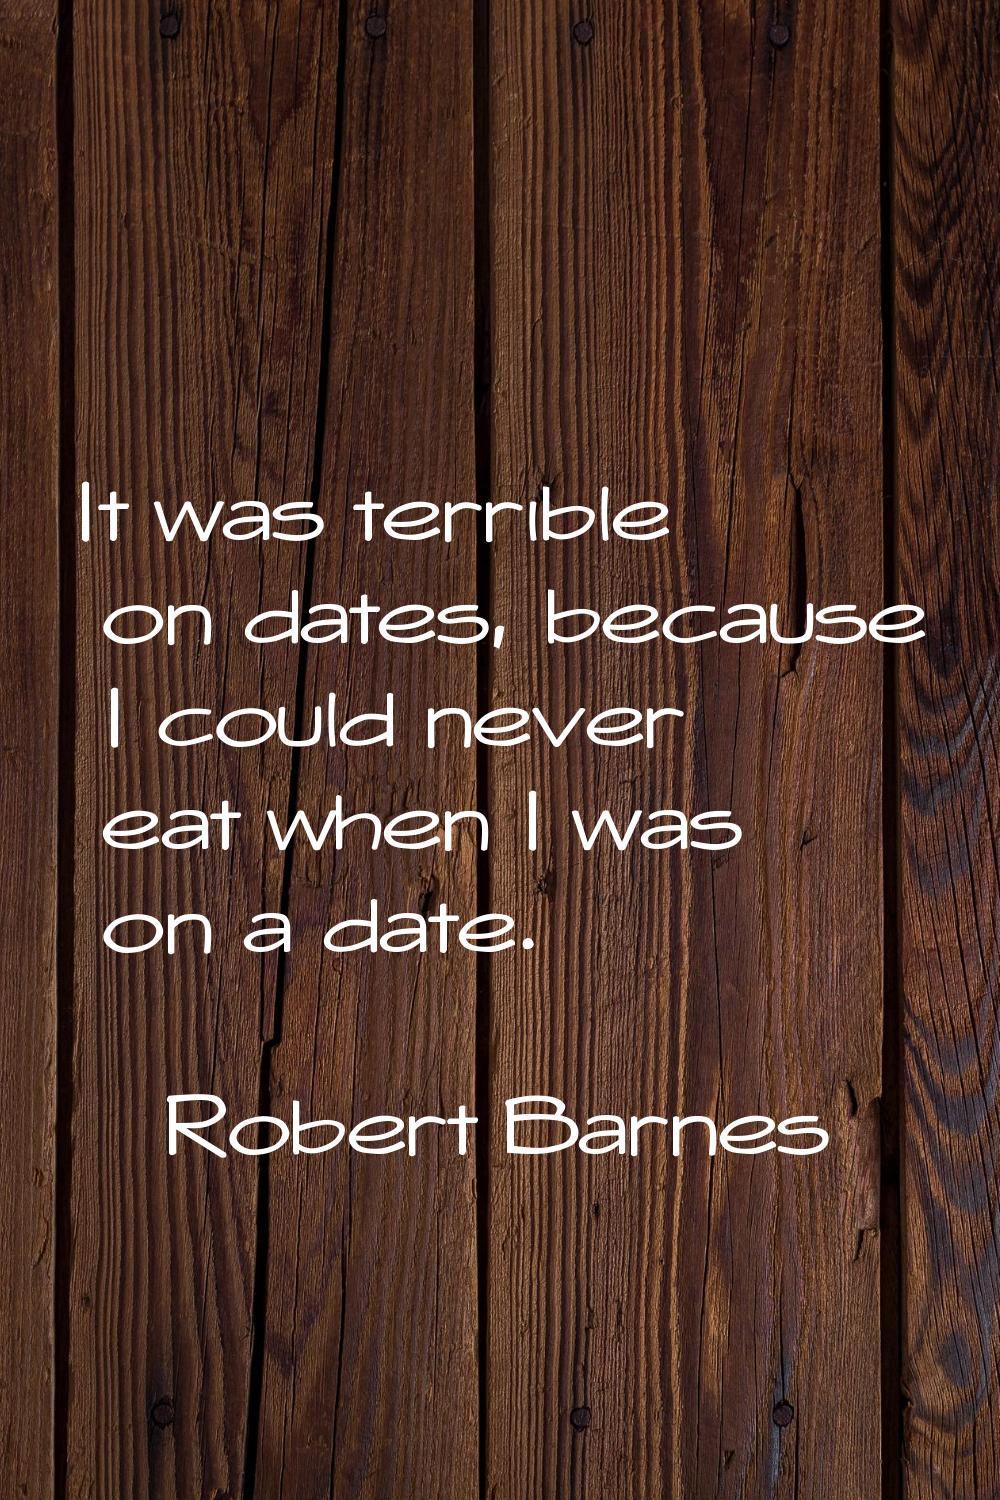 It was terrible on dates, because I could never eat when I was on a date.